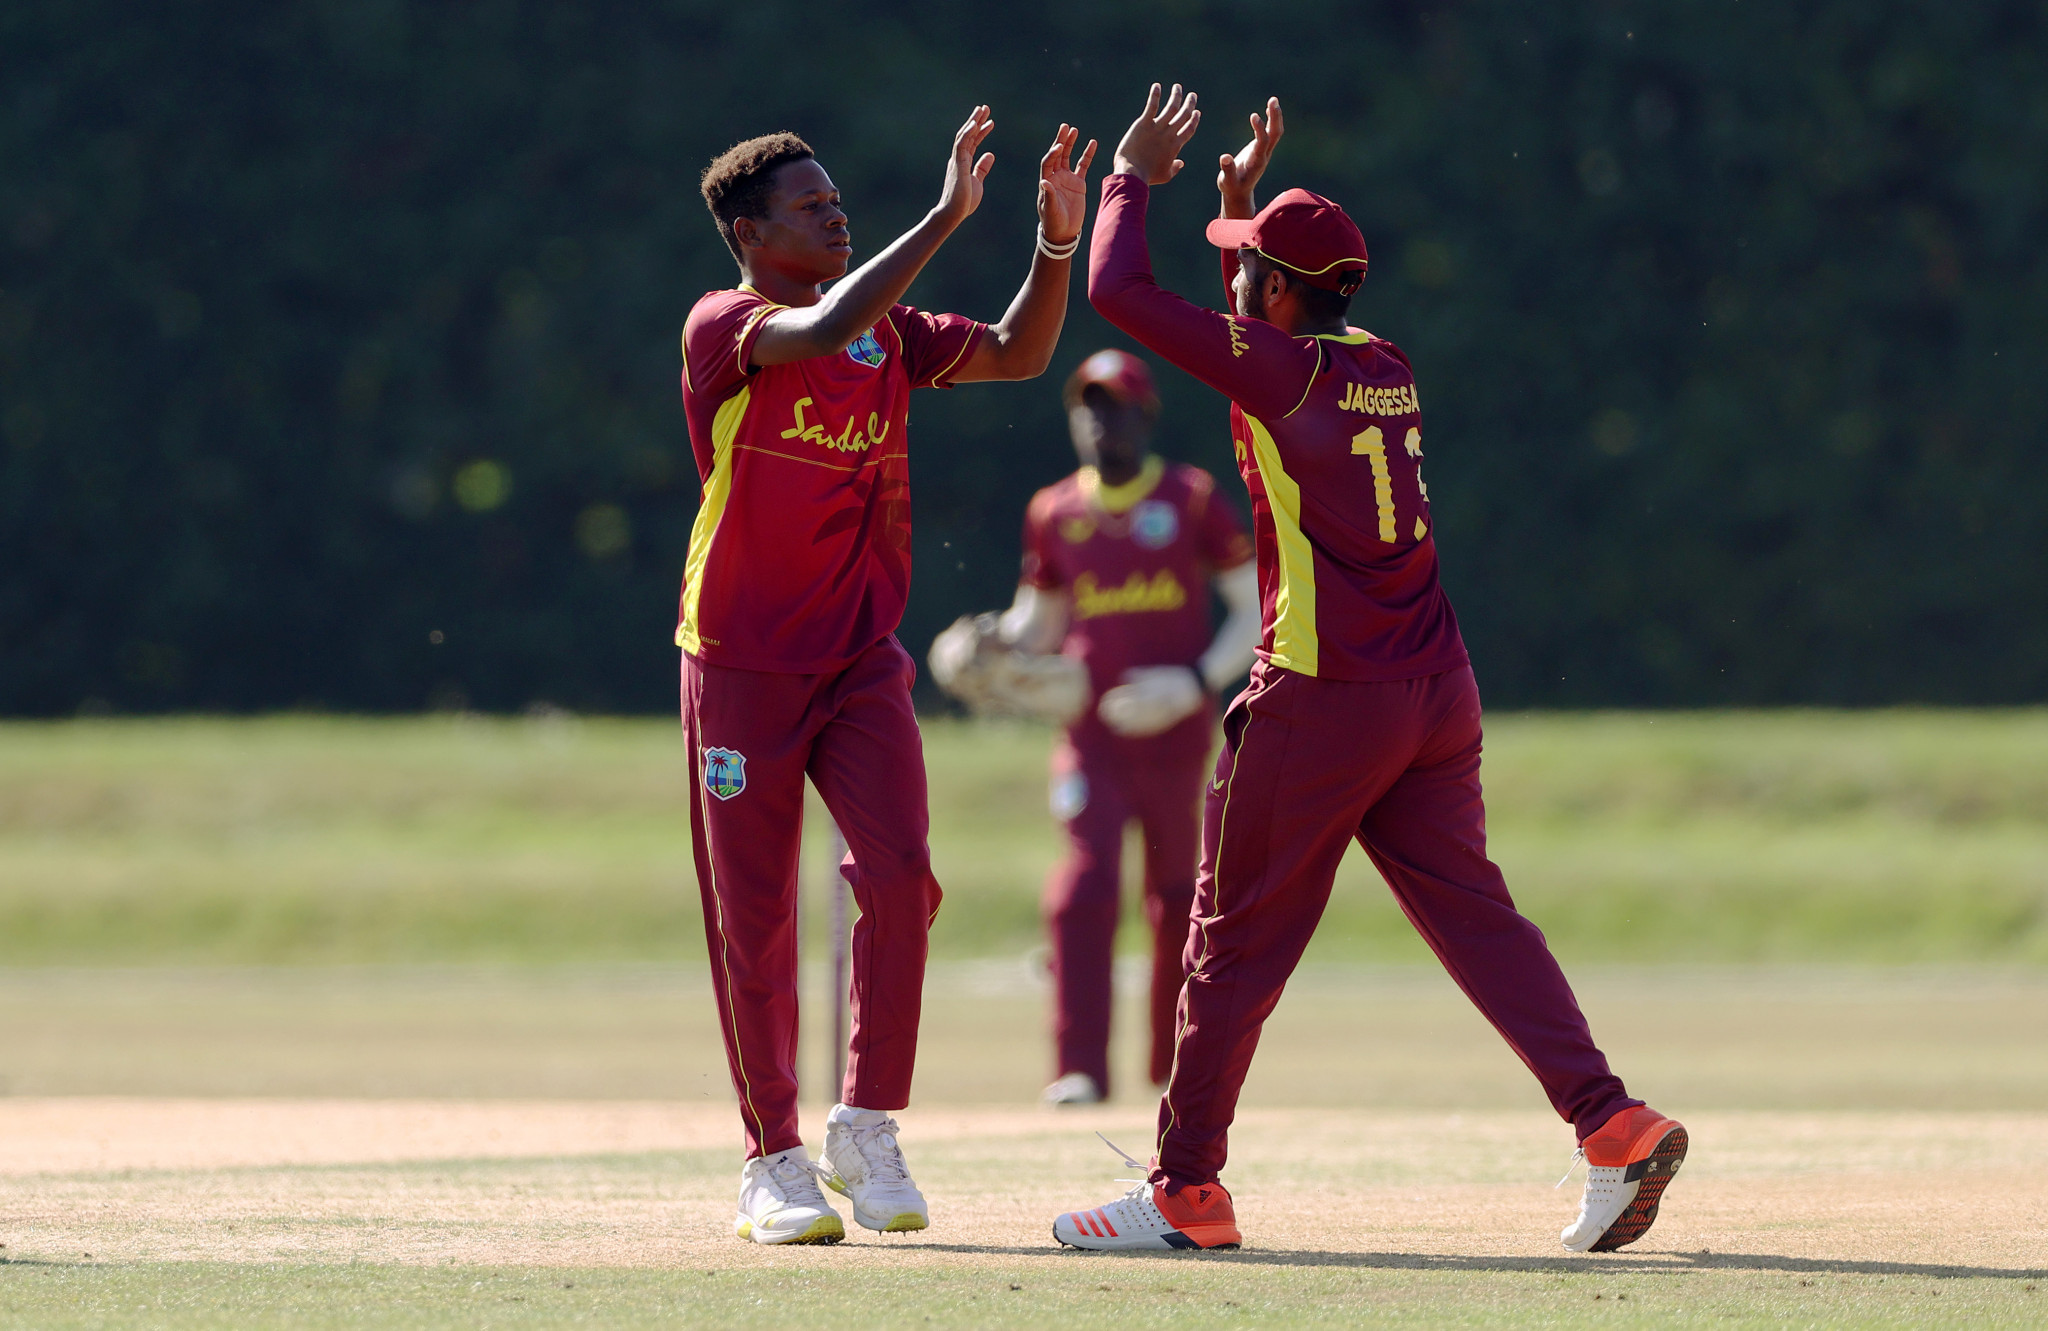 Hosts West Indies were beaten by Australia and Sri Lanka in Group D, and dropped into the Plate at the Under-19 Cricket World Cup ©Getty Images